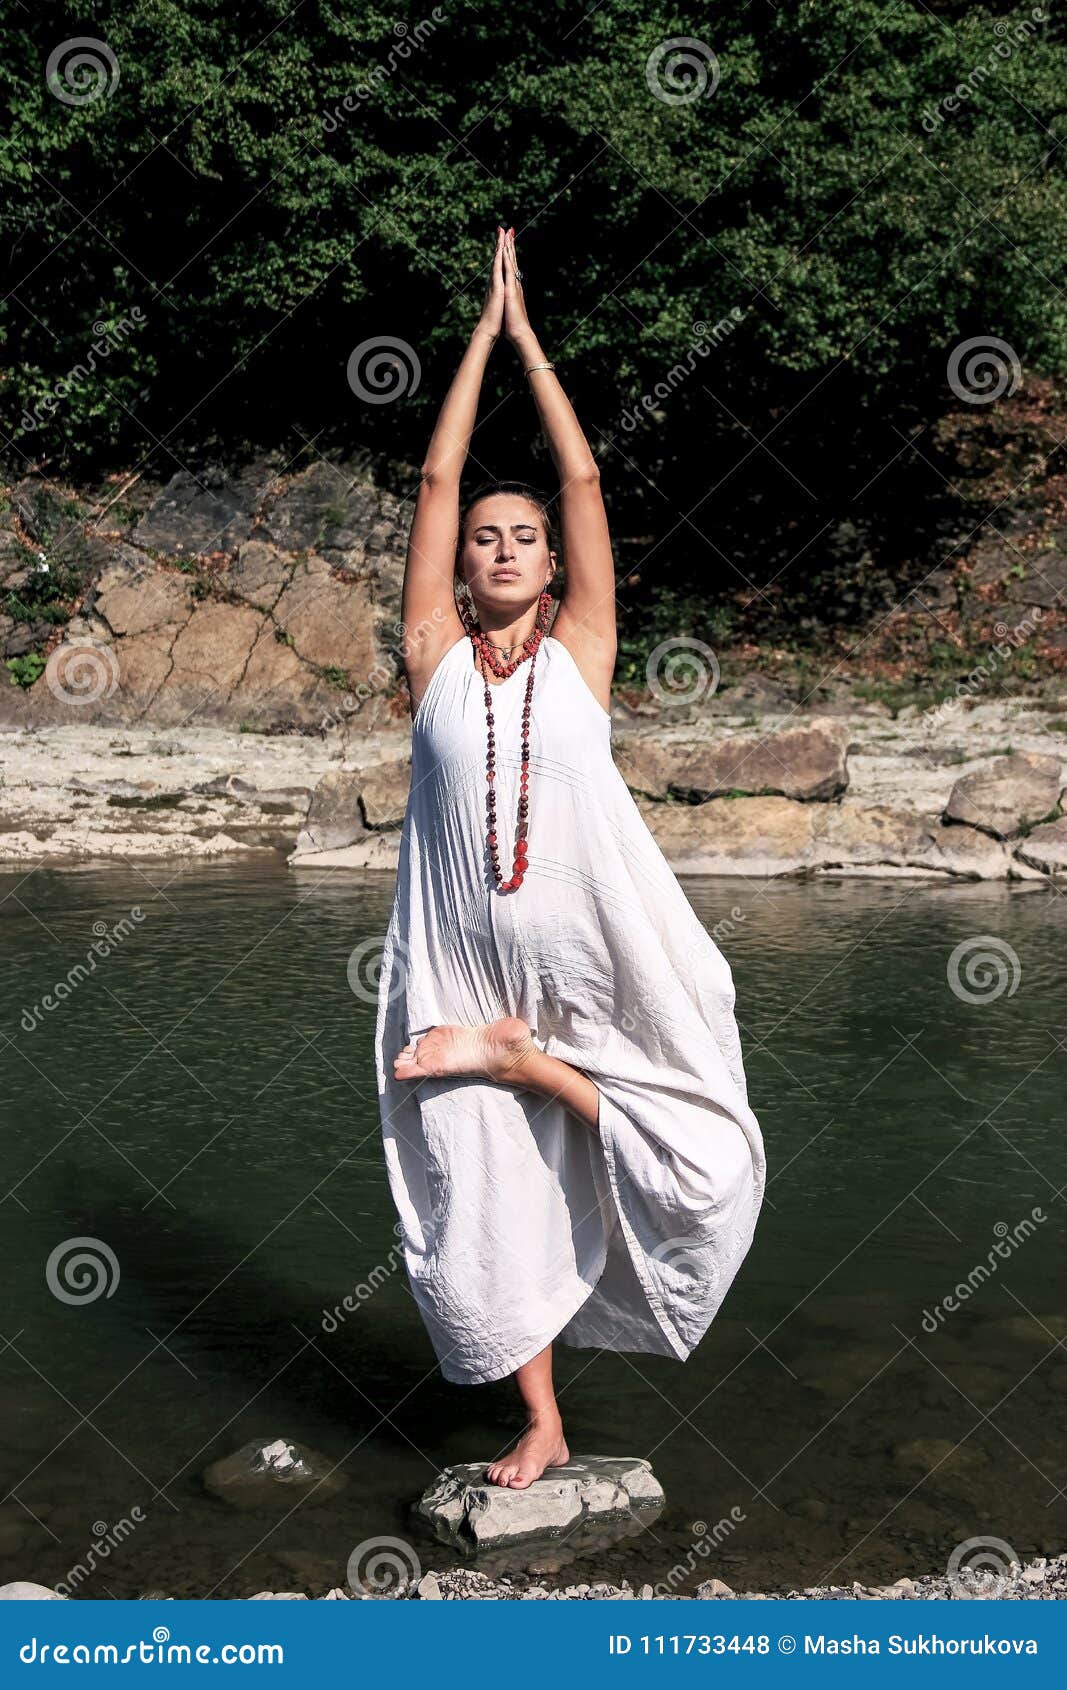 Girl in White Dress is Engaged in Yoga Stock Photo - Image of europeoid,  design: 111733448